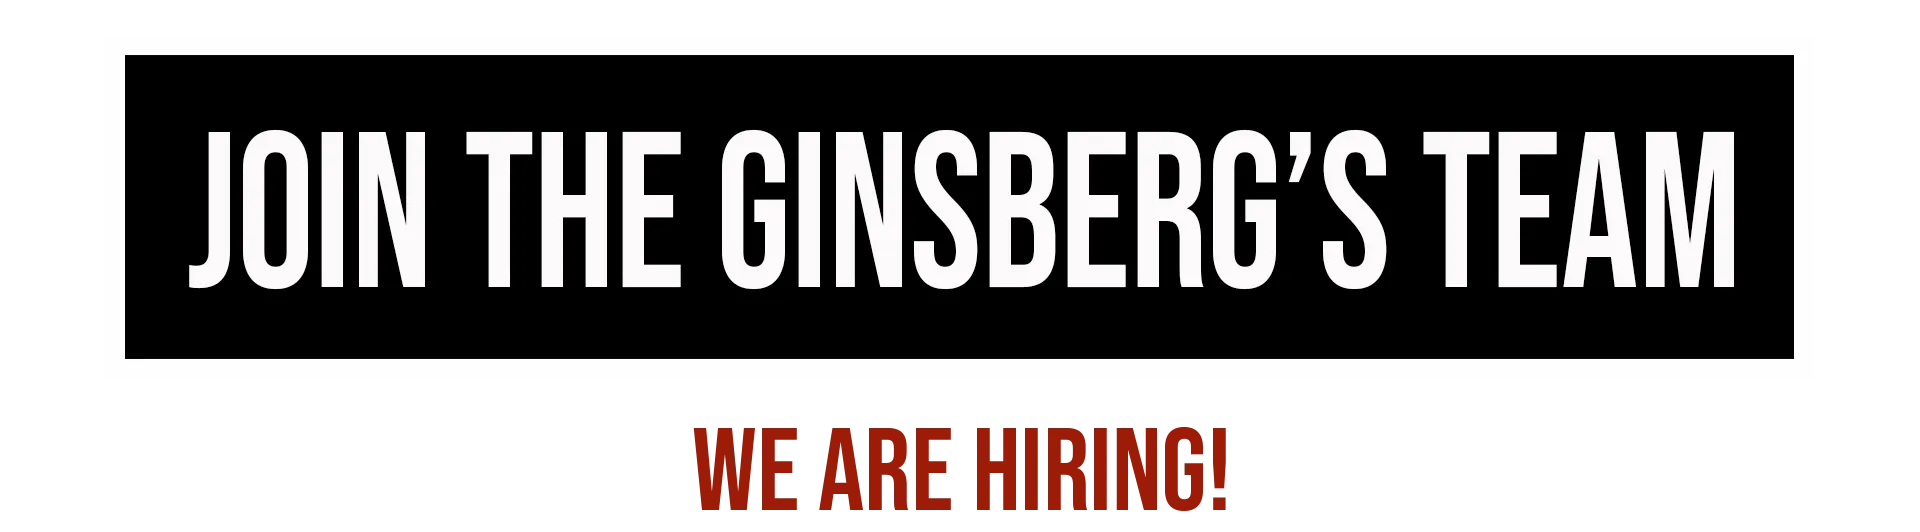 Ginsberg's is Hiring albany, poughkeepsie, east greenbush, troy , hudson jobs Careers for cdl drivers, warehouse, customer service, financial accountant, cdl a drivers, forklift operators, shift warehouse workers and more